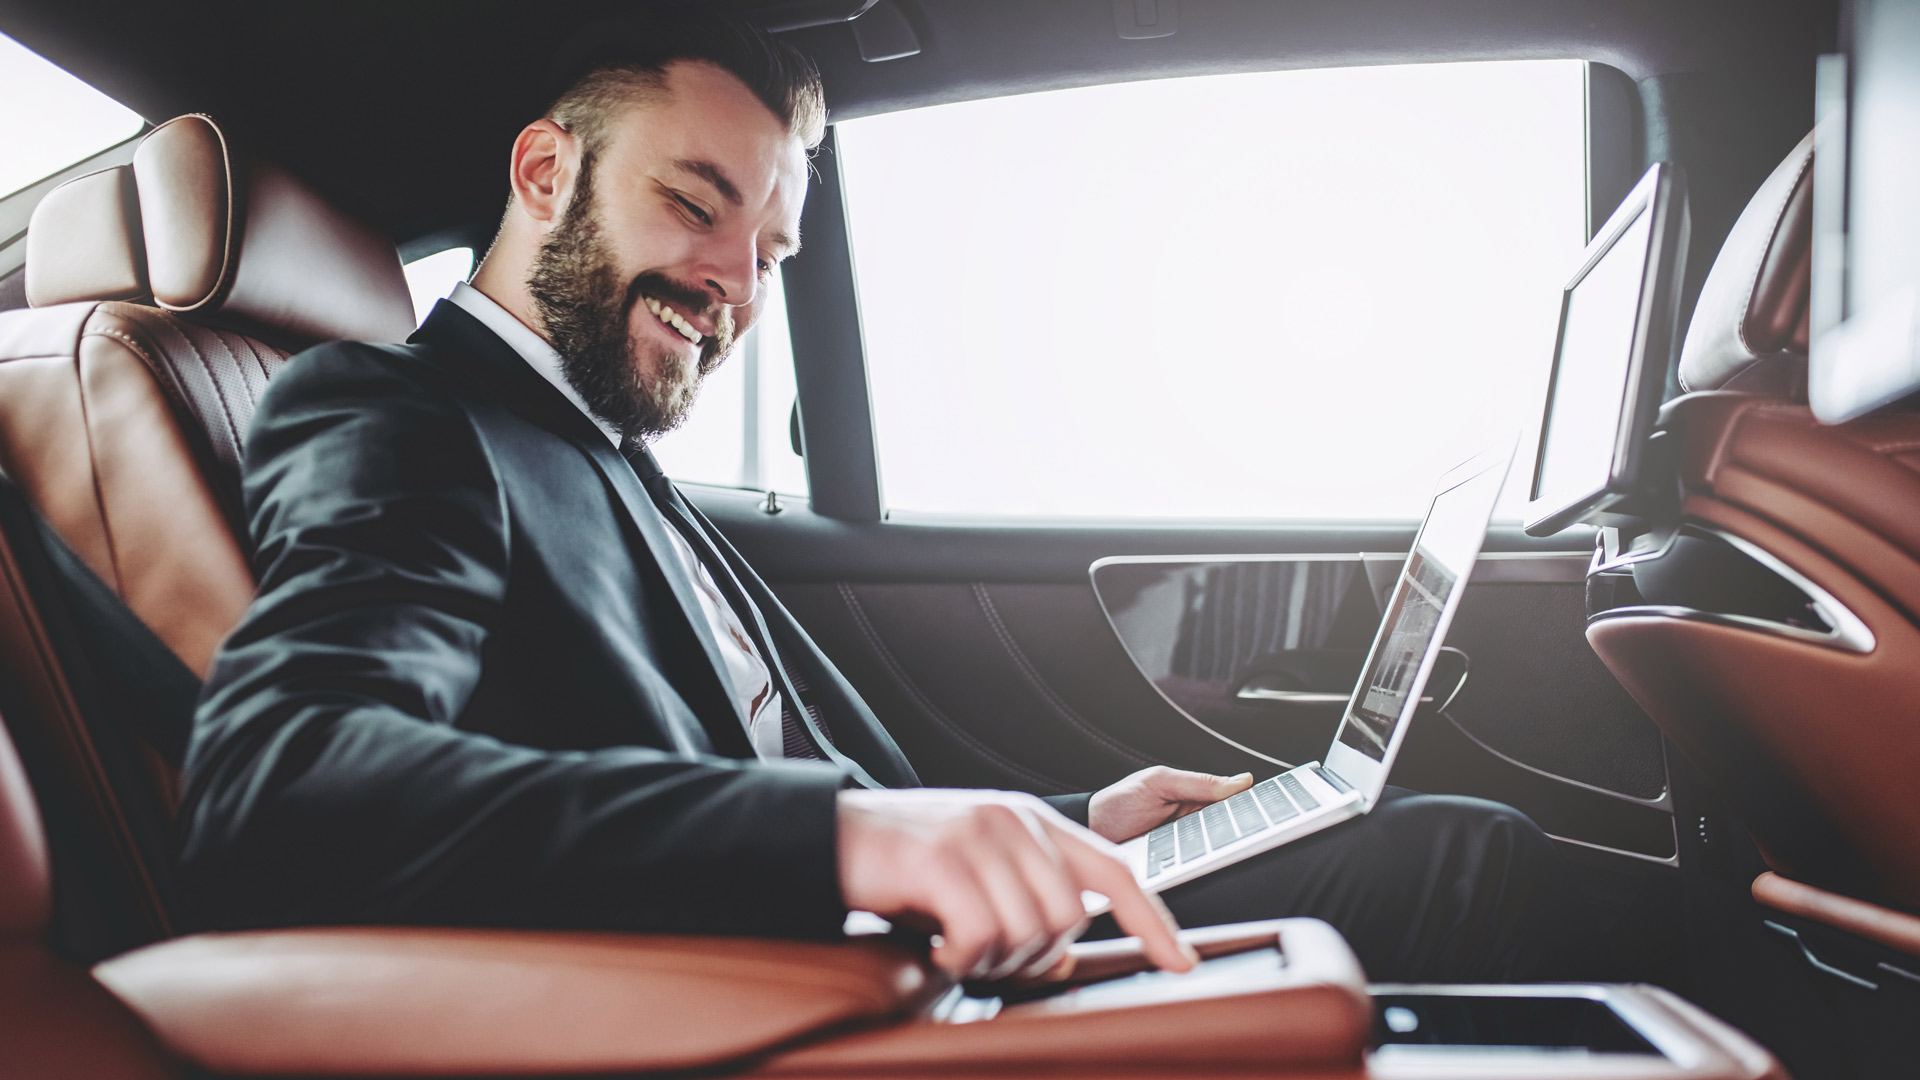 Black Car Service in NYC | Serious bearded business man in suit is working with laptop while being in trip.